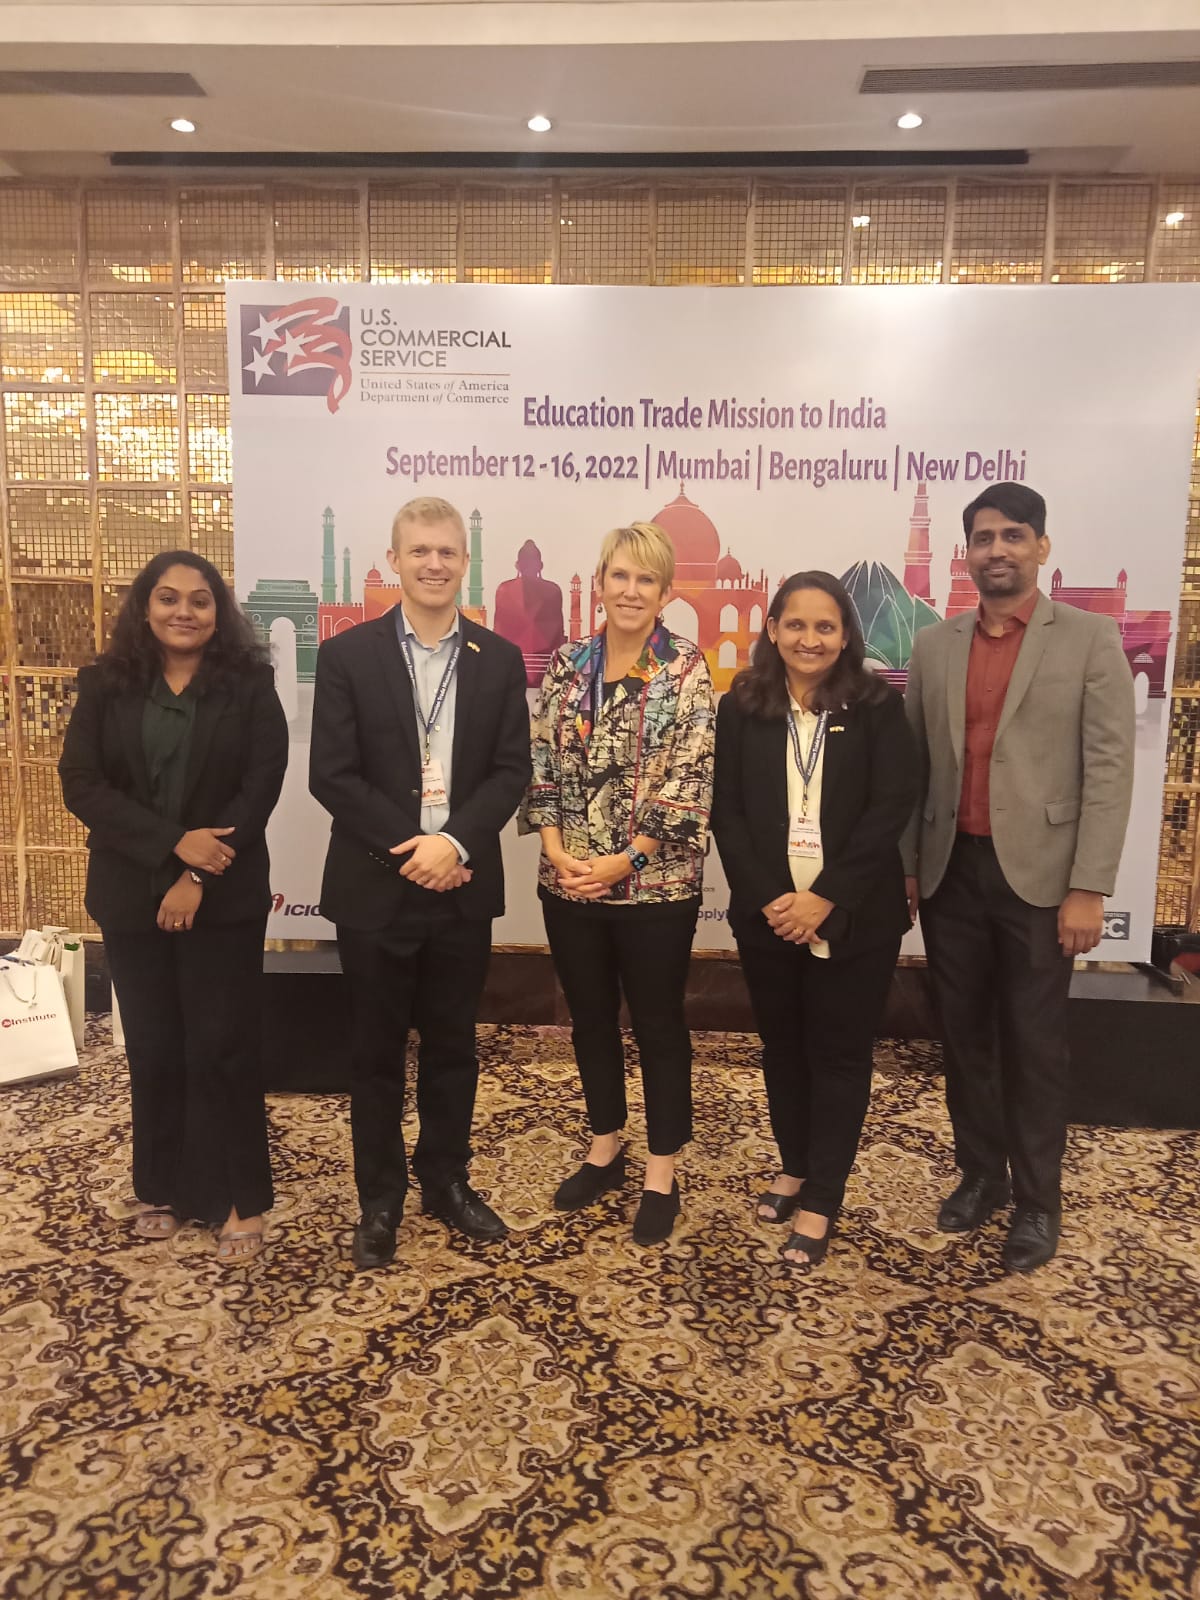 Ms. Shary Pillai and Mr. Vatsal Patel Represented Parul University in Education Trade Mission 2022